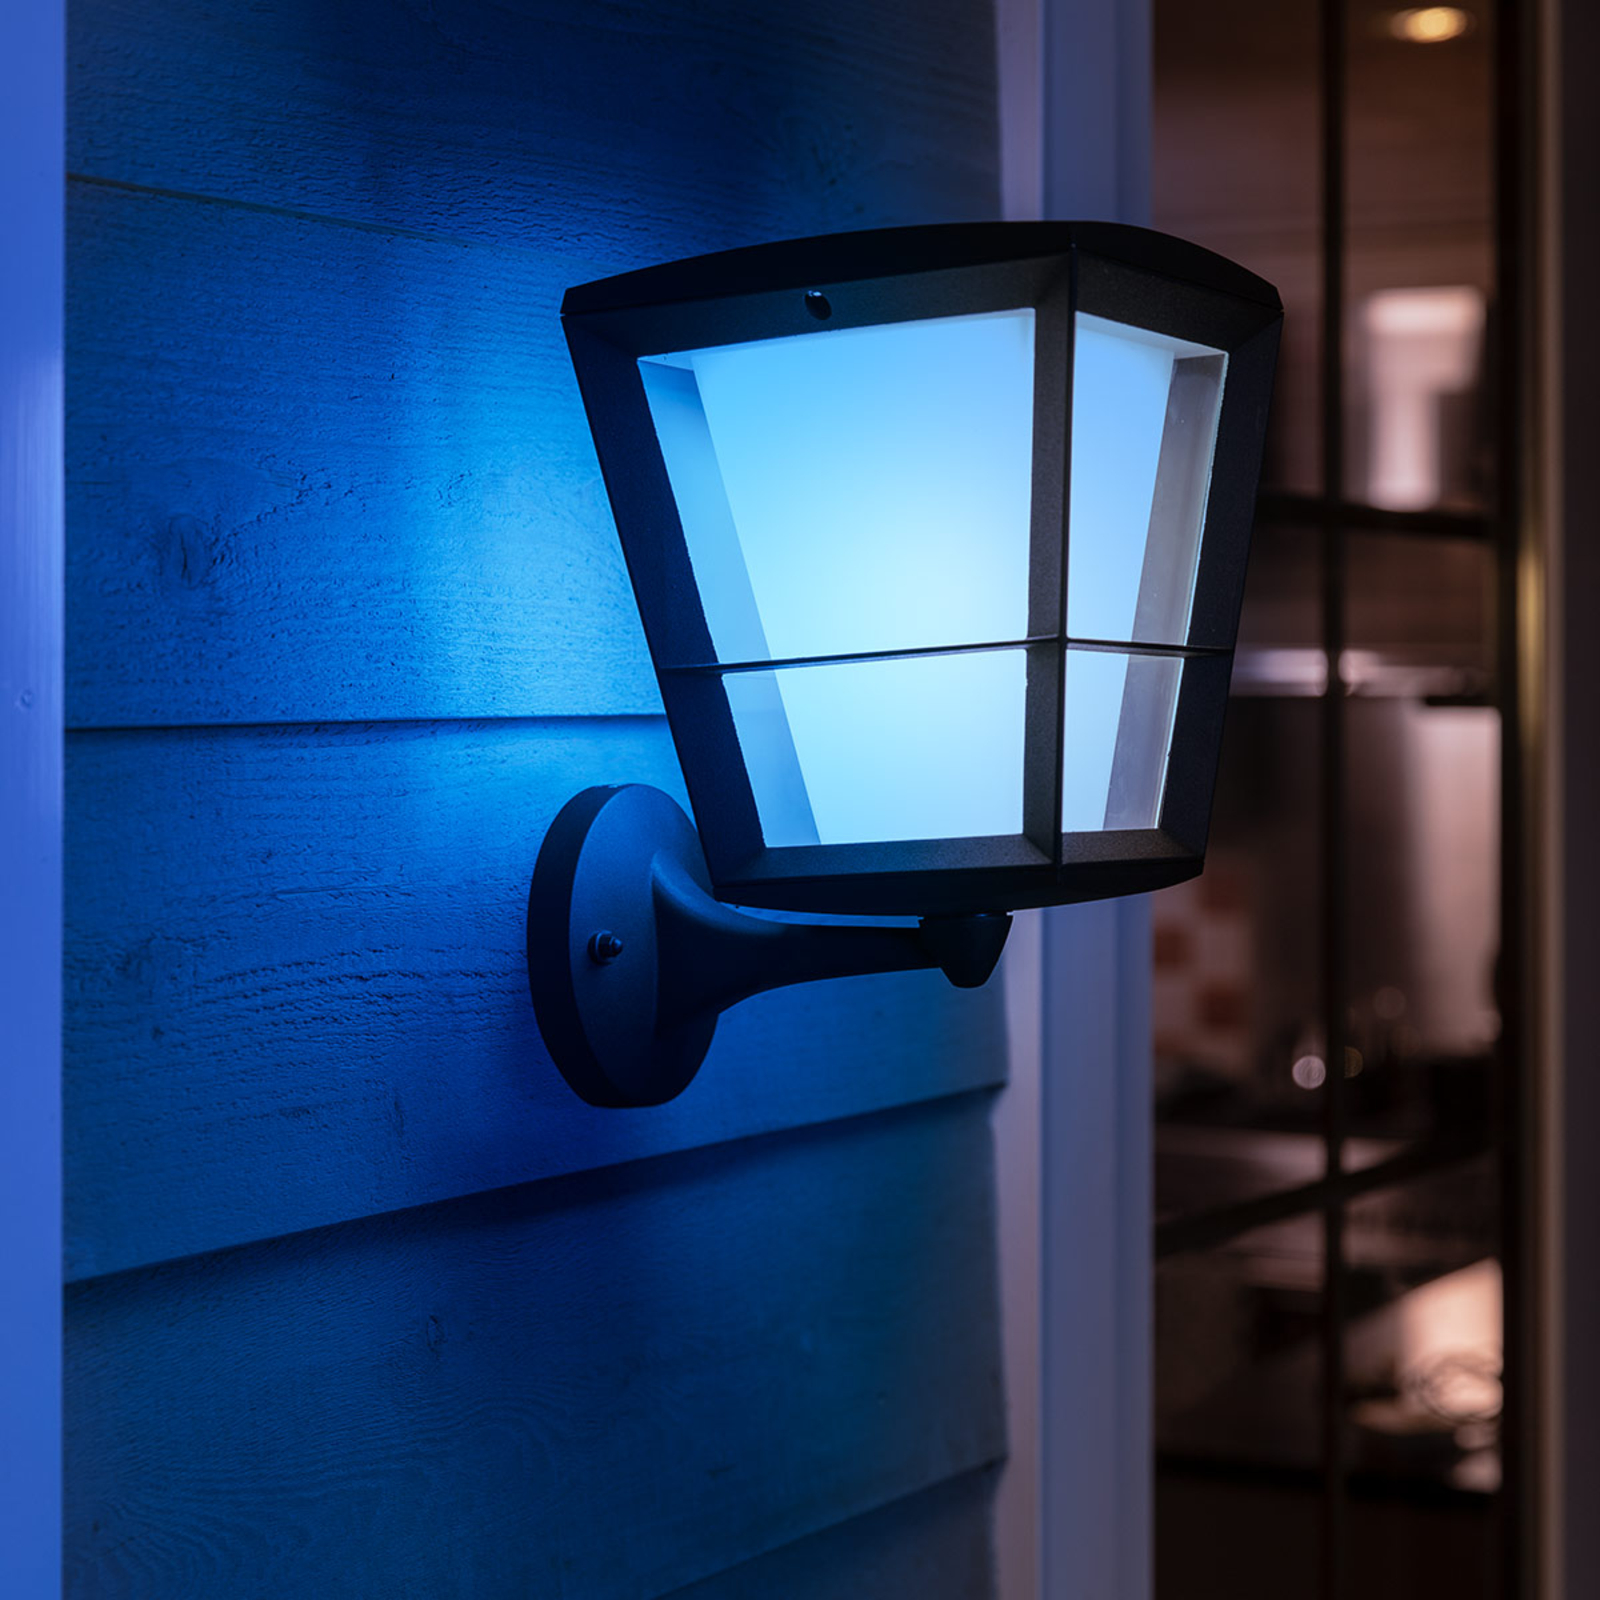 Philips Hue White+Color Econic vegglampe oppe